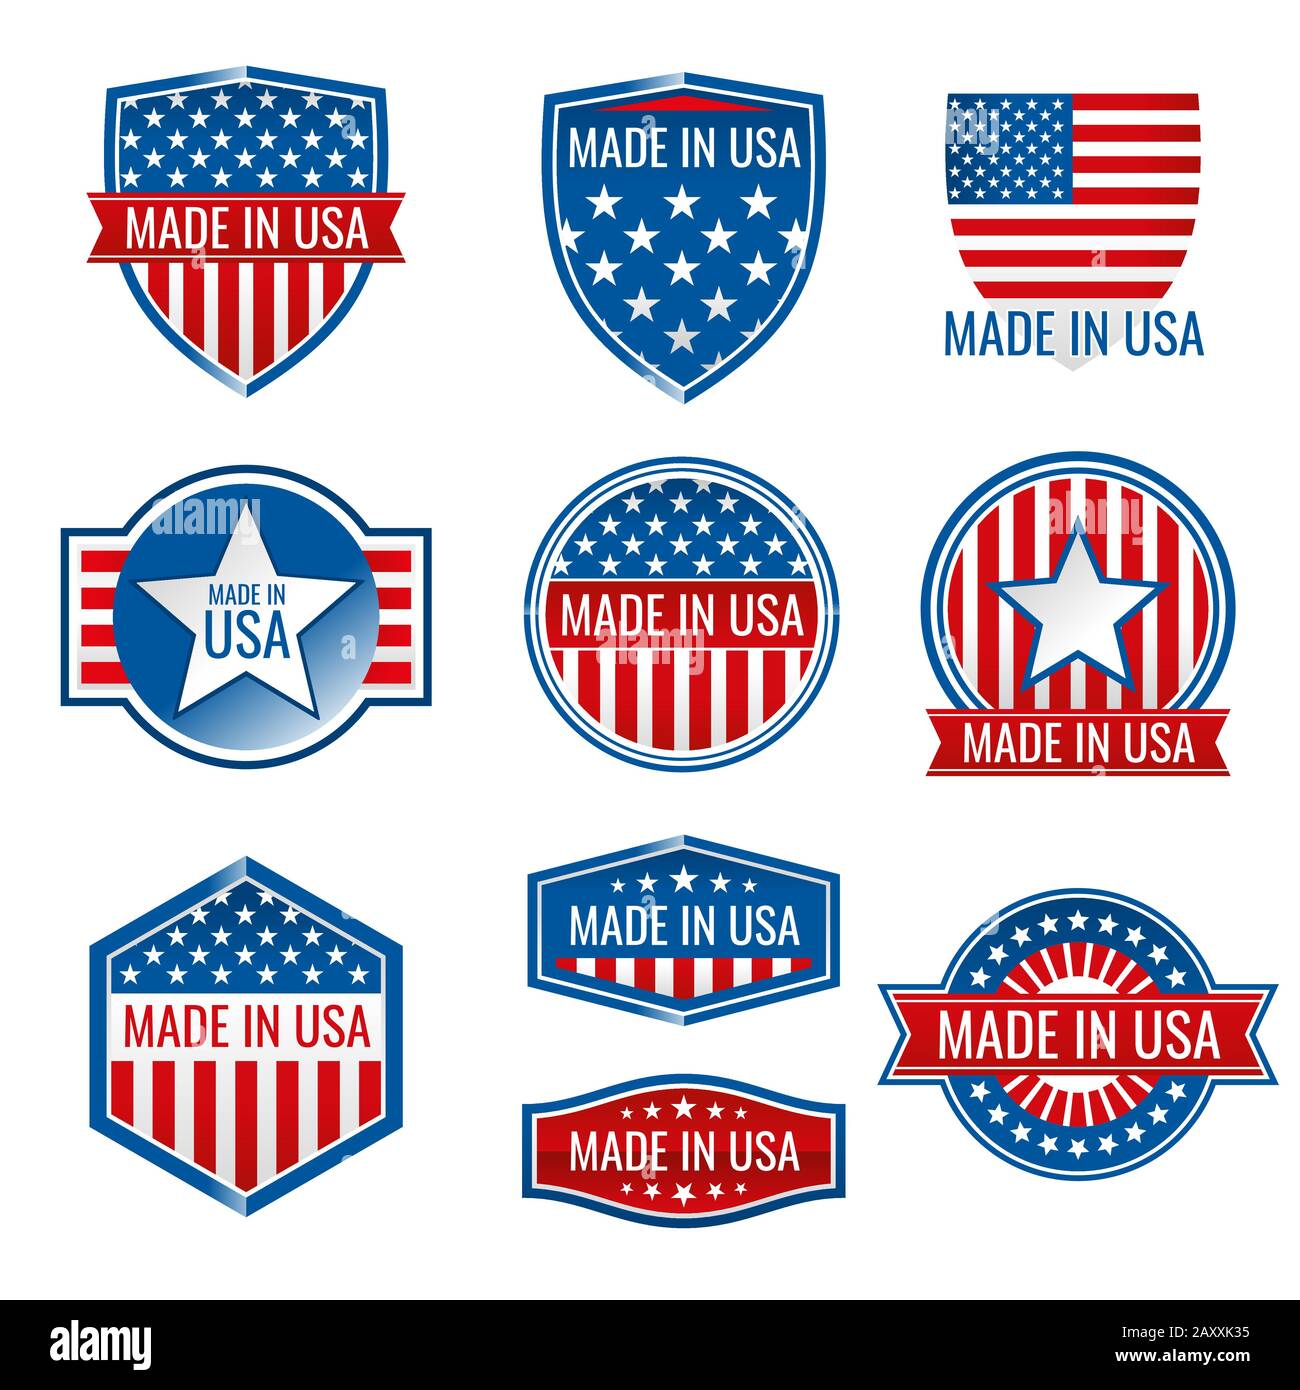 Made in USA vector icons. Made in usa icon, american product made in usa, quality made in usa illustration Stock Vector